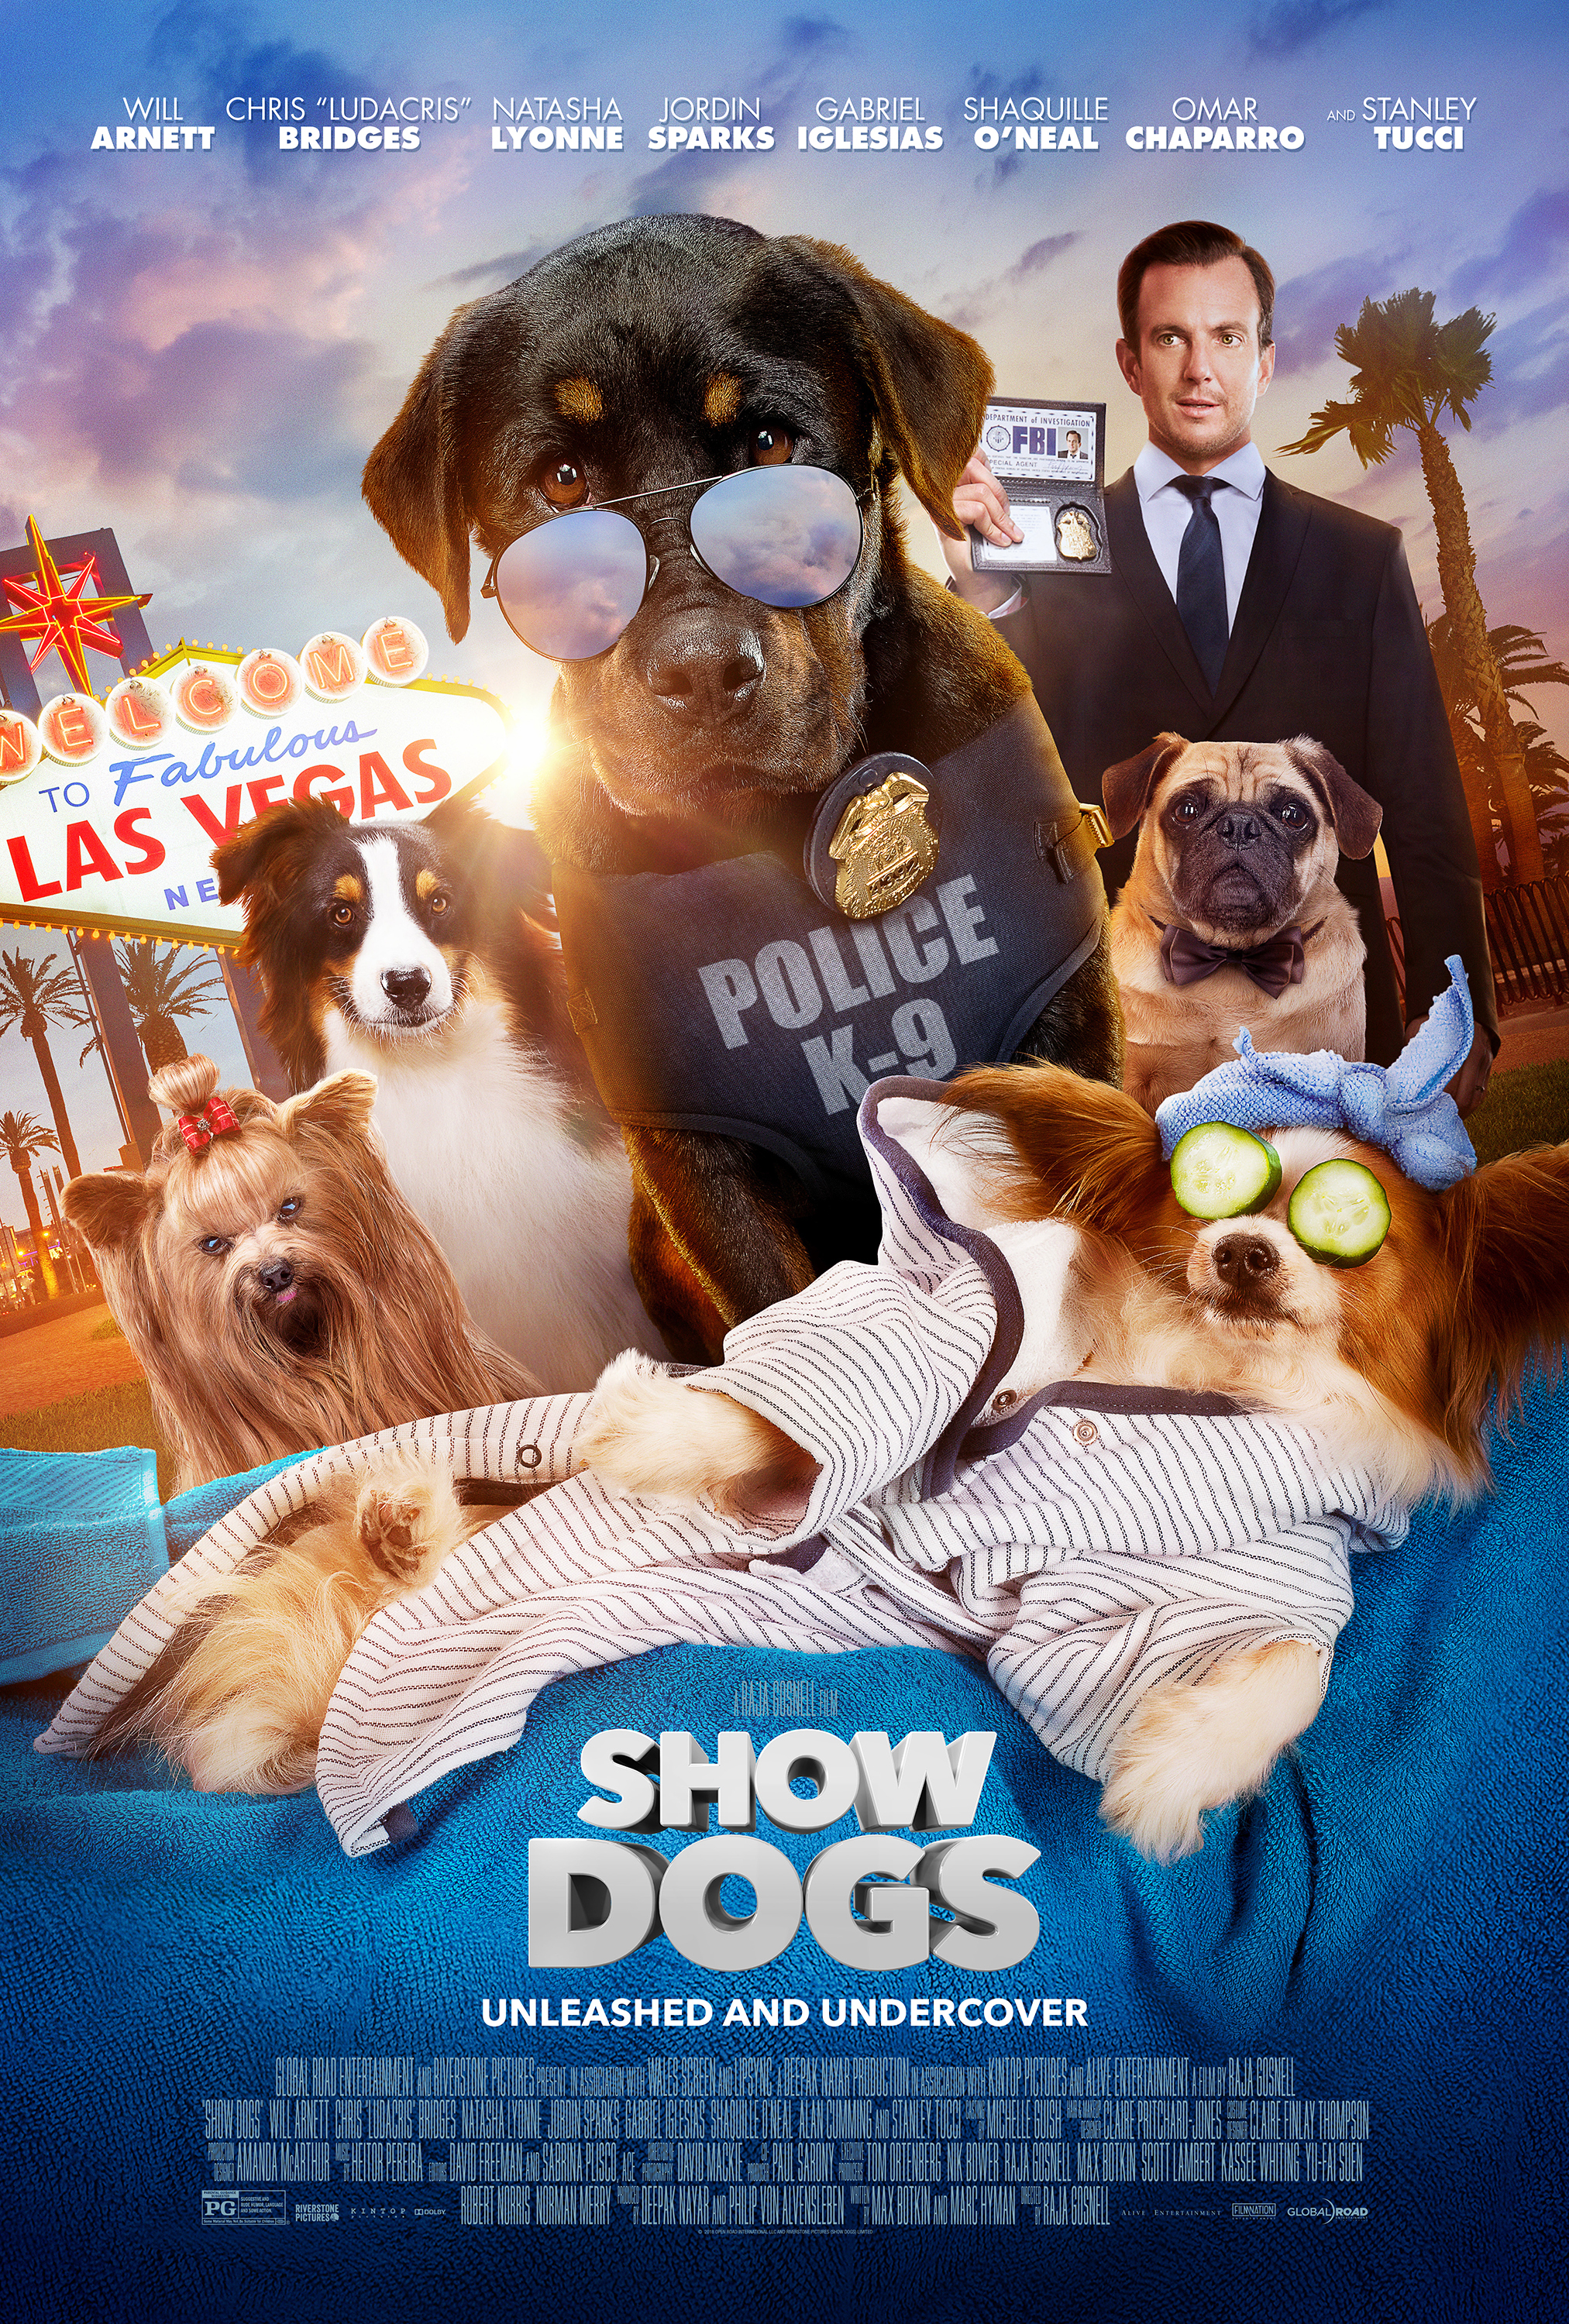 Show Dogs Trailer: It's Miss Congeniality with Talking Dogs